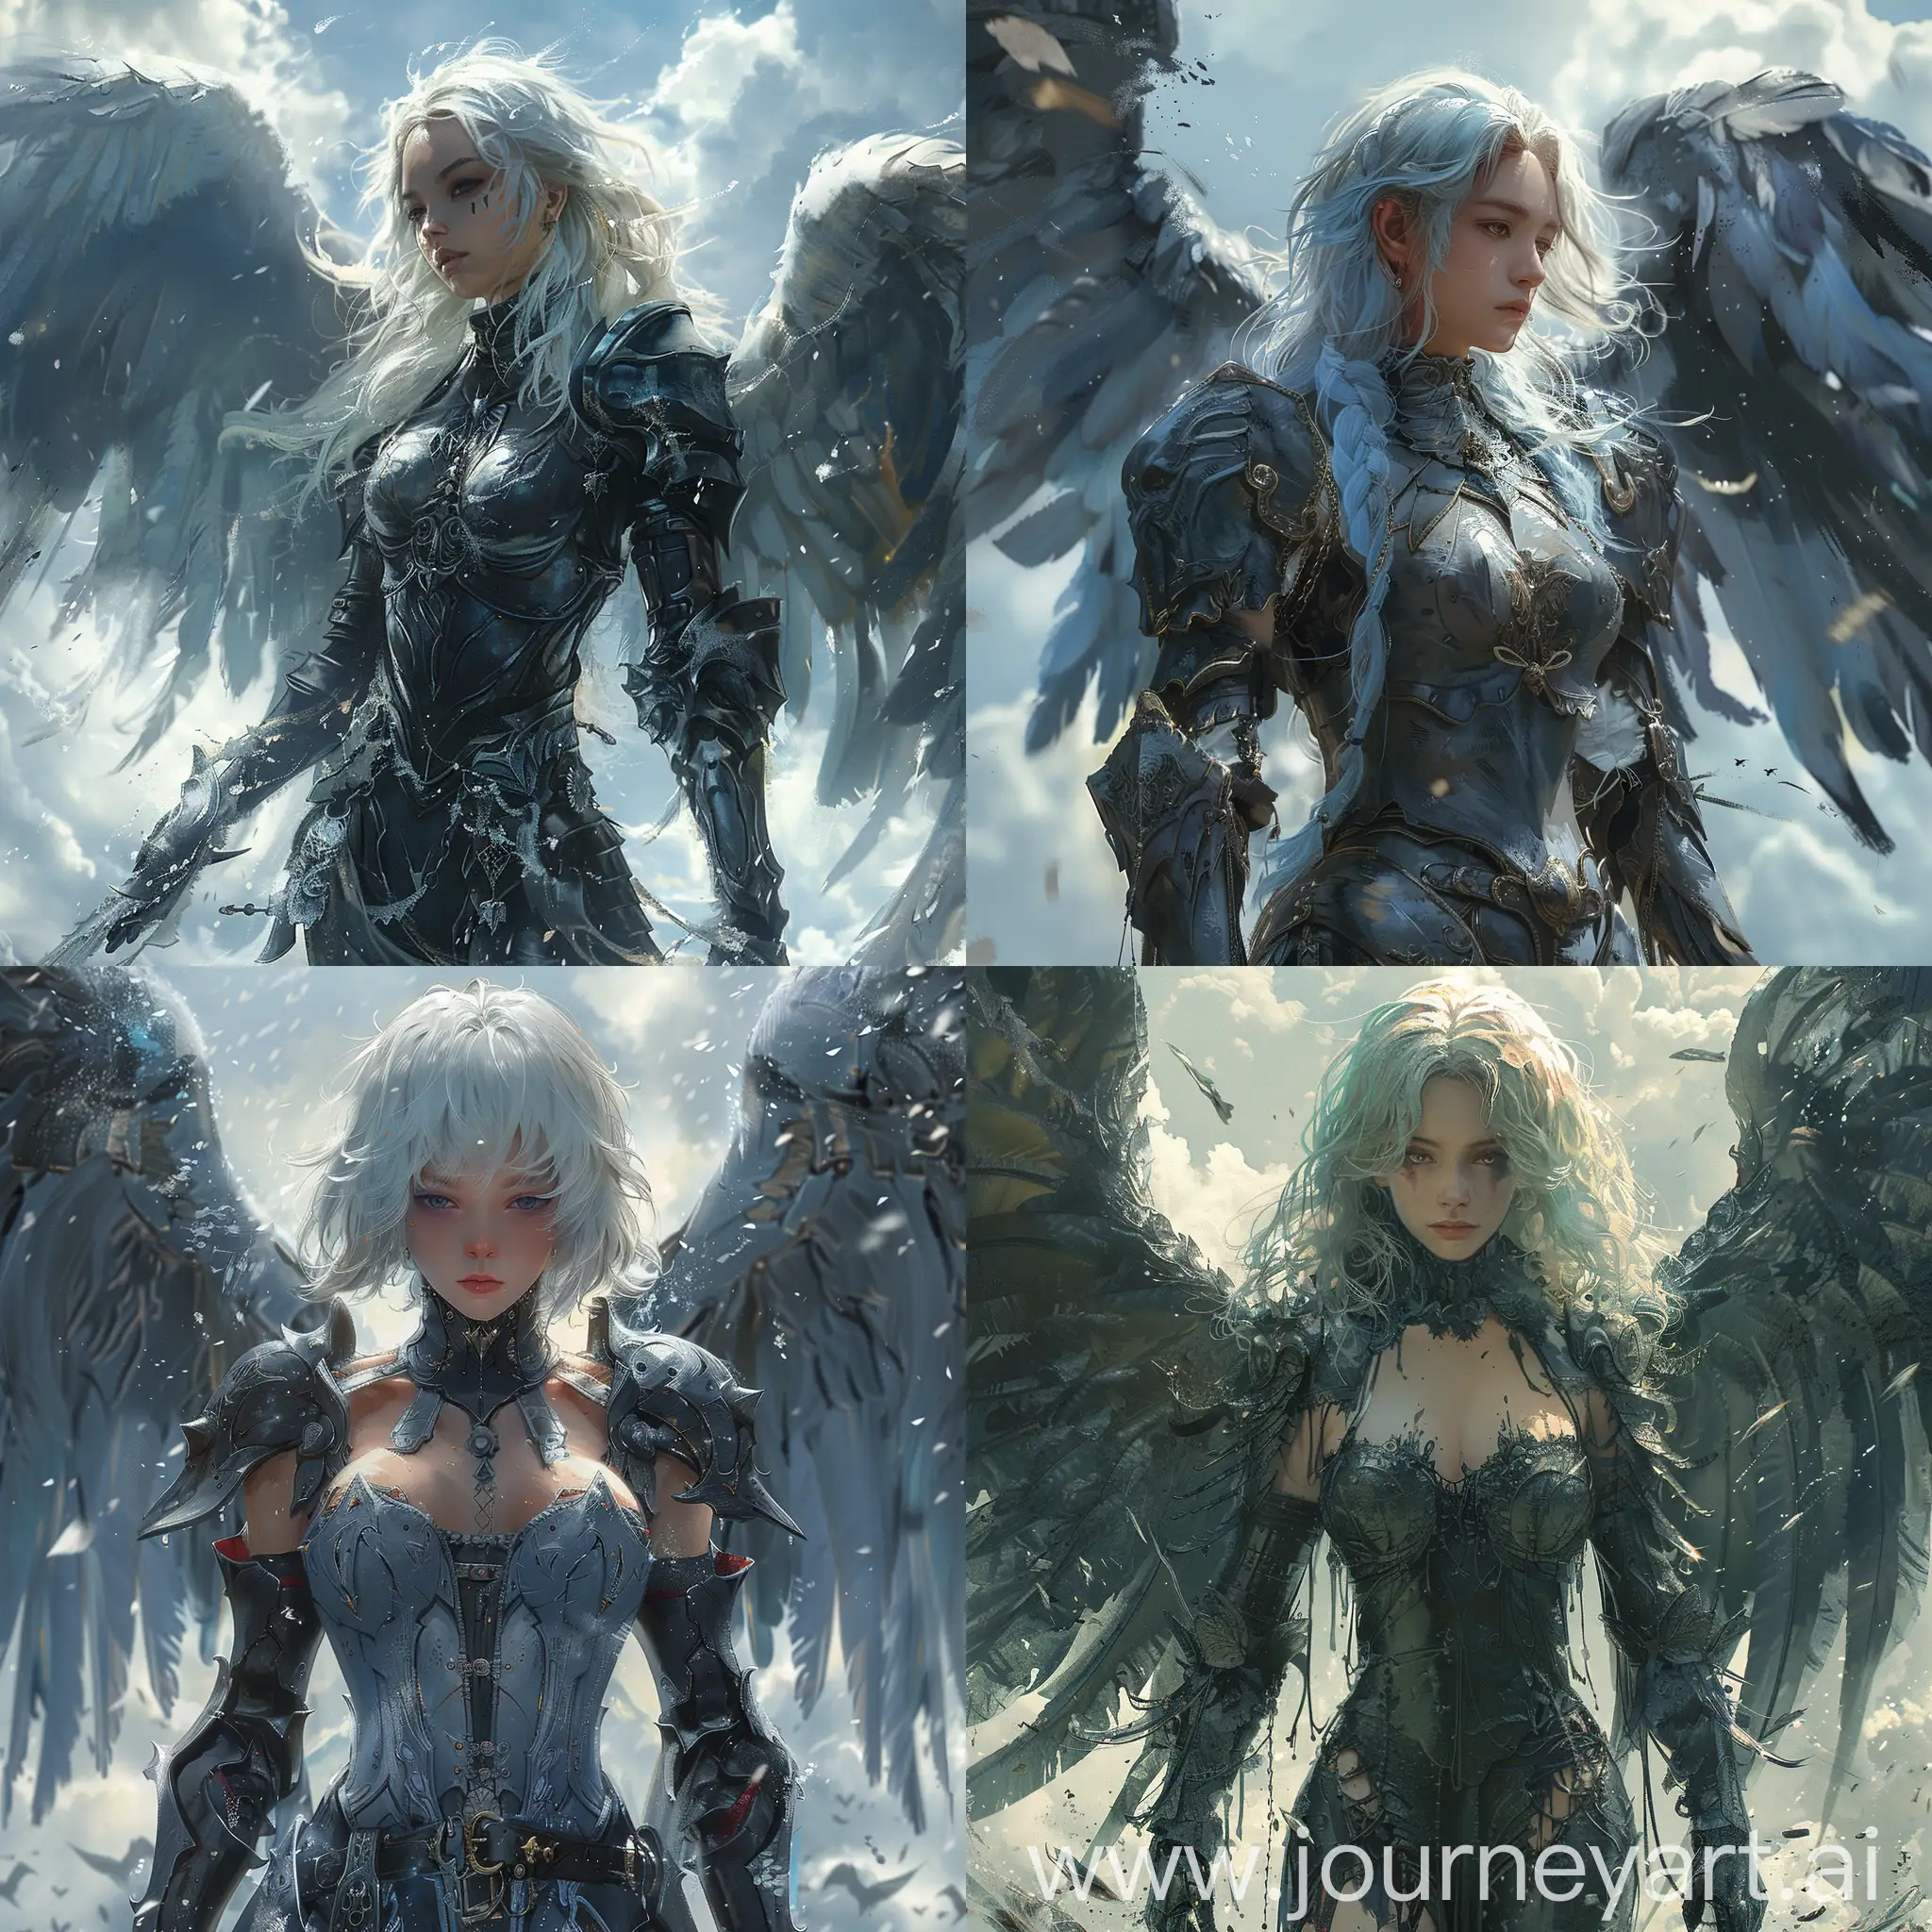 Anime::1.3 dark angel with large black wings, standing in front of a sky background with white and blue hues, the anime angel has white hair and is wearing a armor-like outfit, the wings are spread out and there are black paint drips trailing from them, --s 500